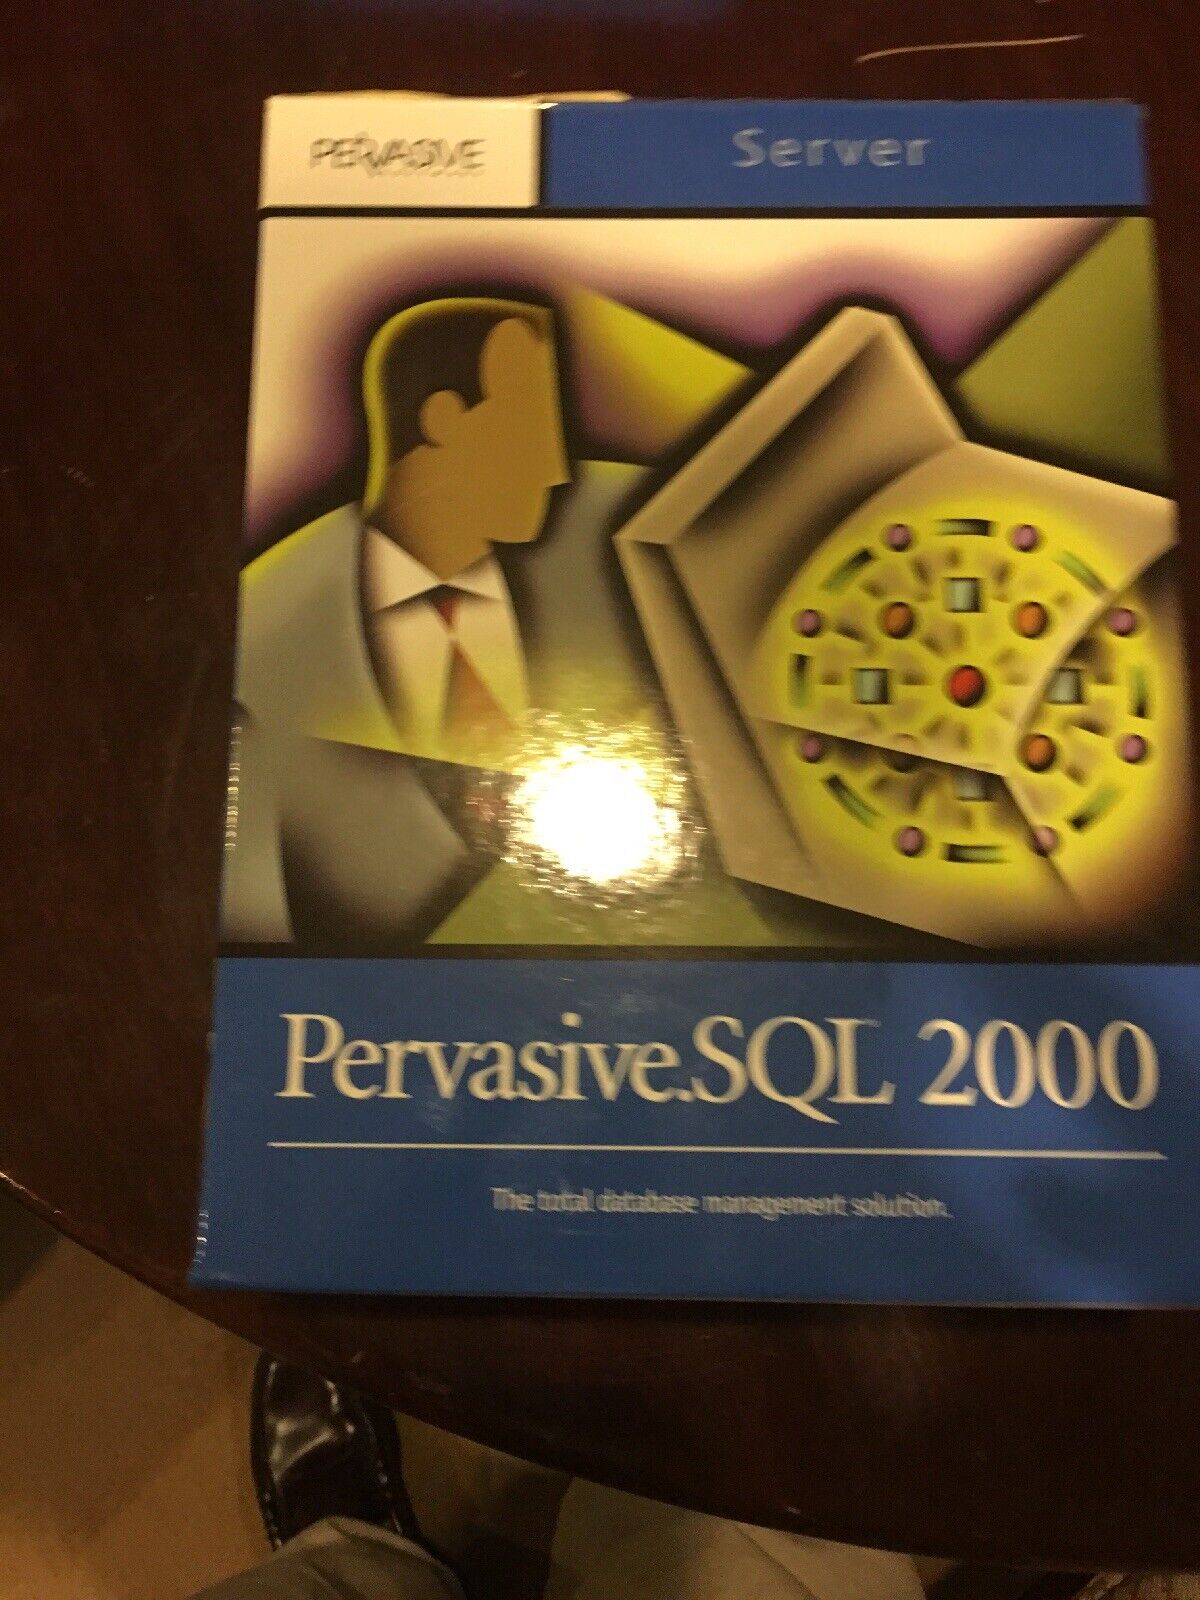 Authentic And Commercial $4995 Pervasive.SQL 2000 Server 10 User. For Windows NT